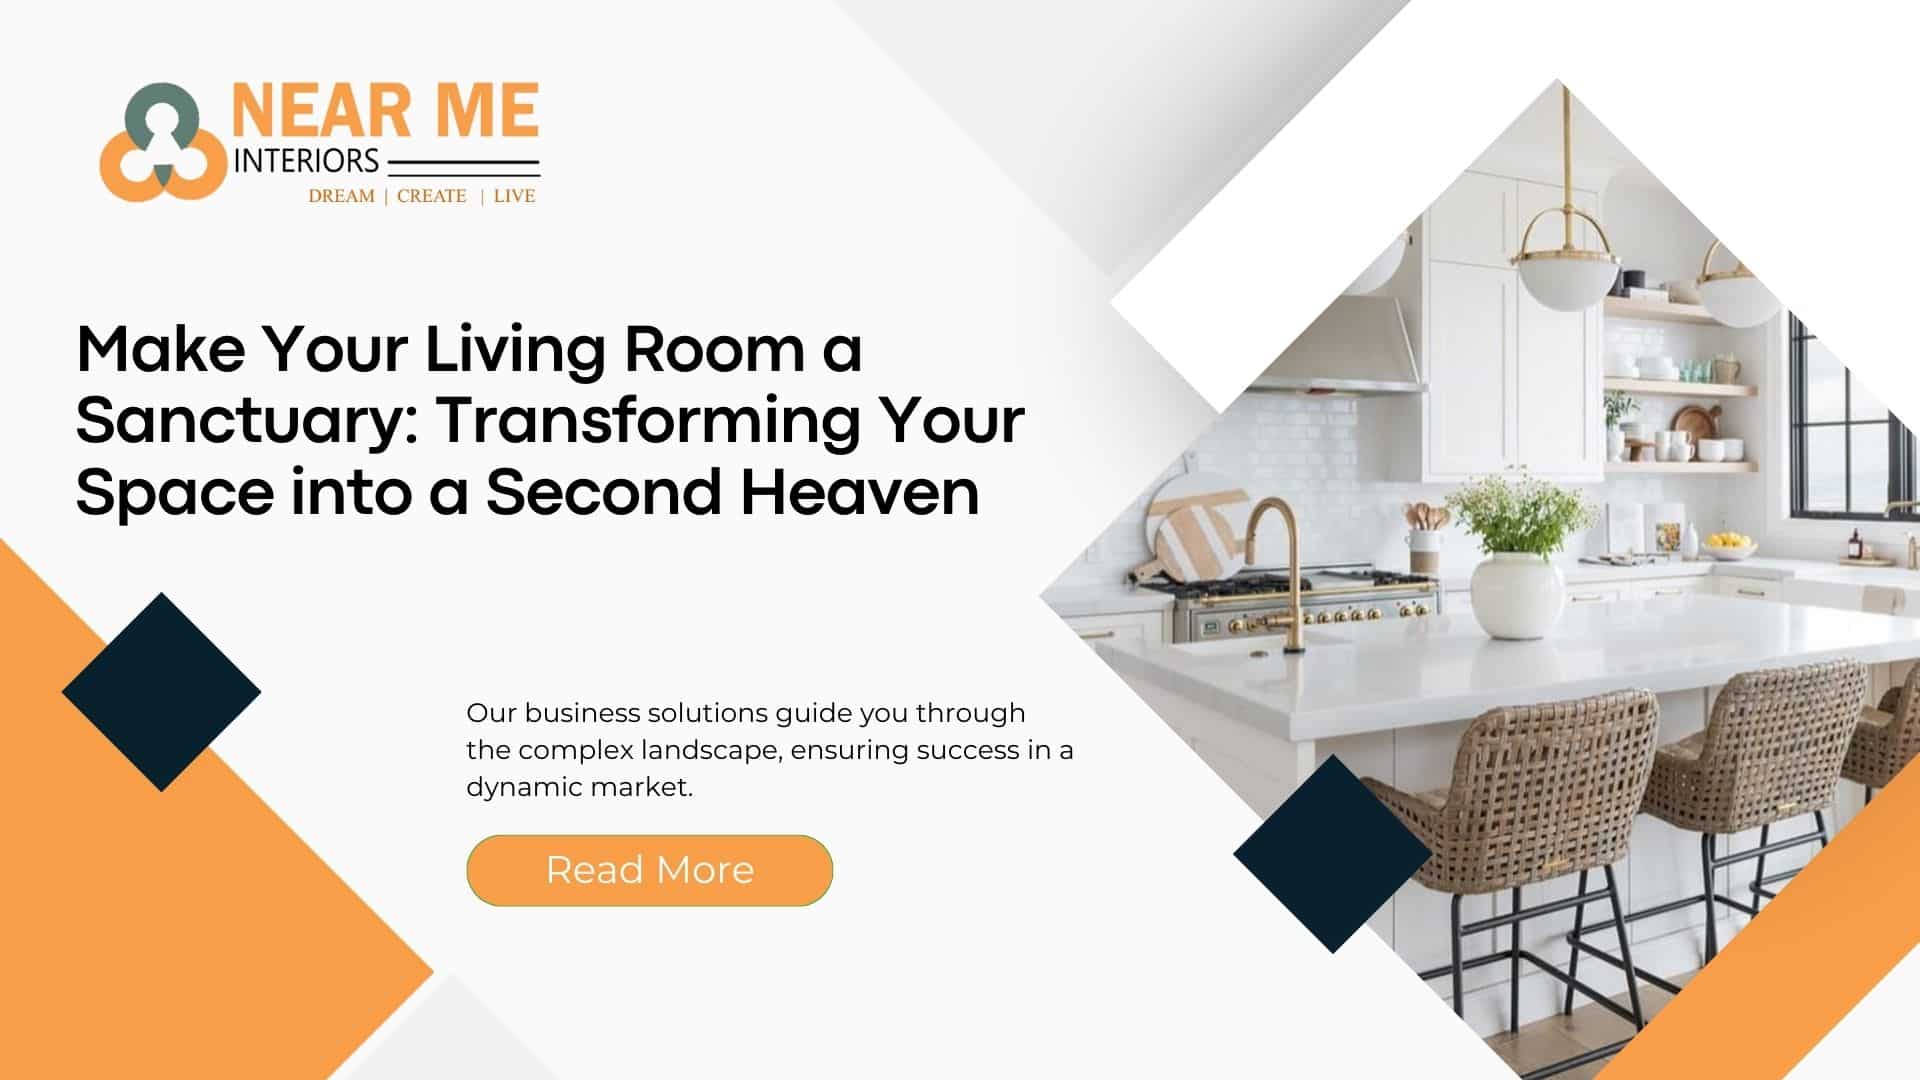 Make Your Living Room a Sanctuary: Transforming Your Space into a Second Heaven